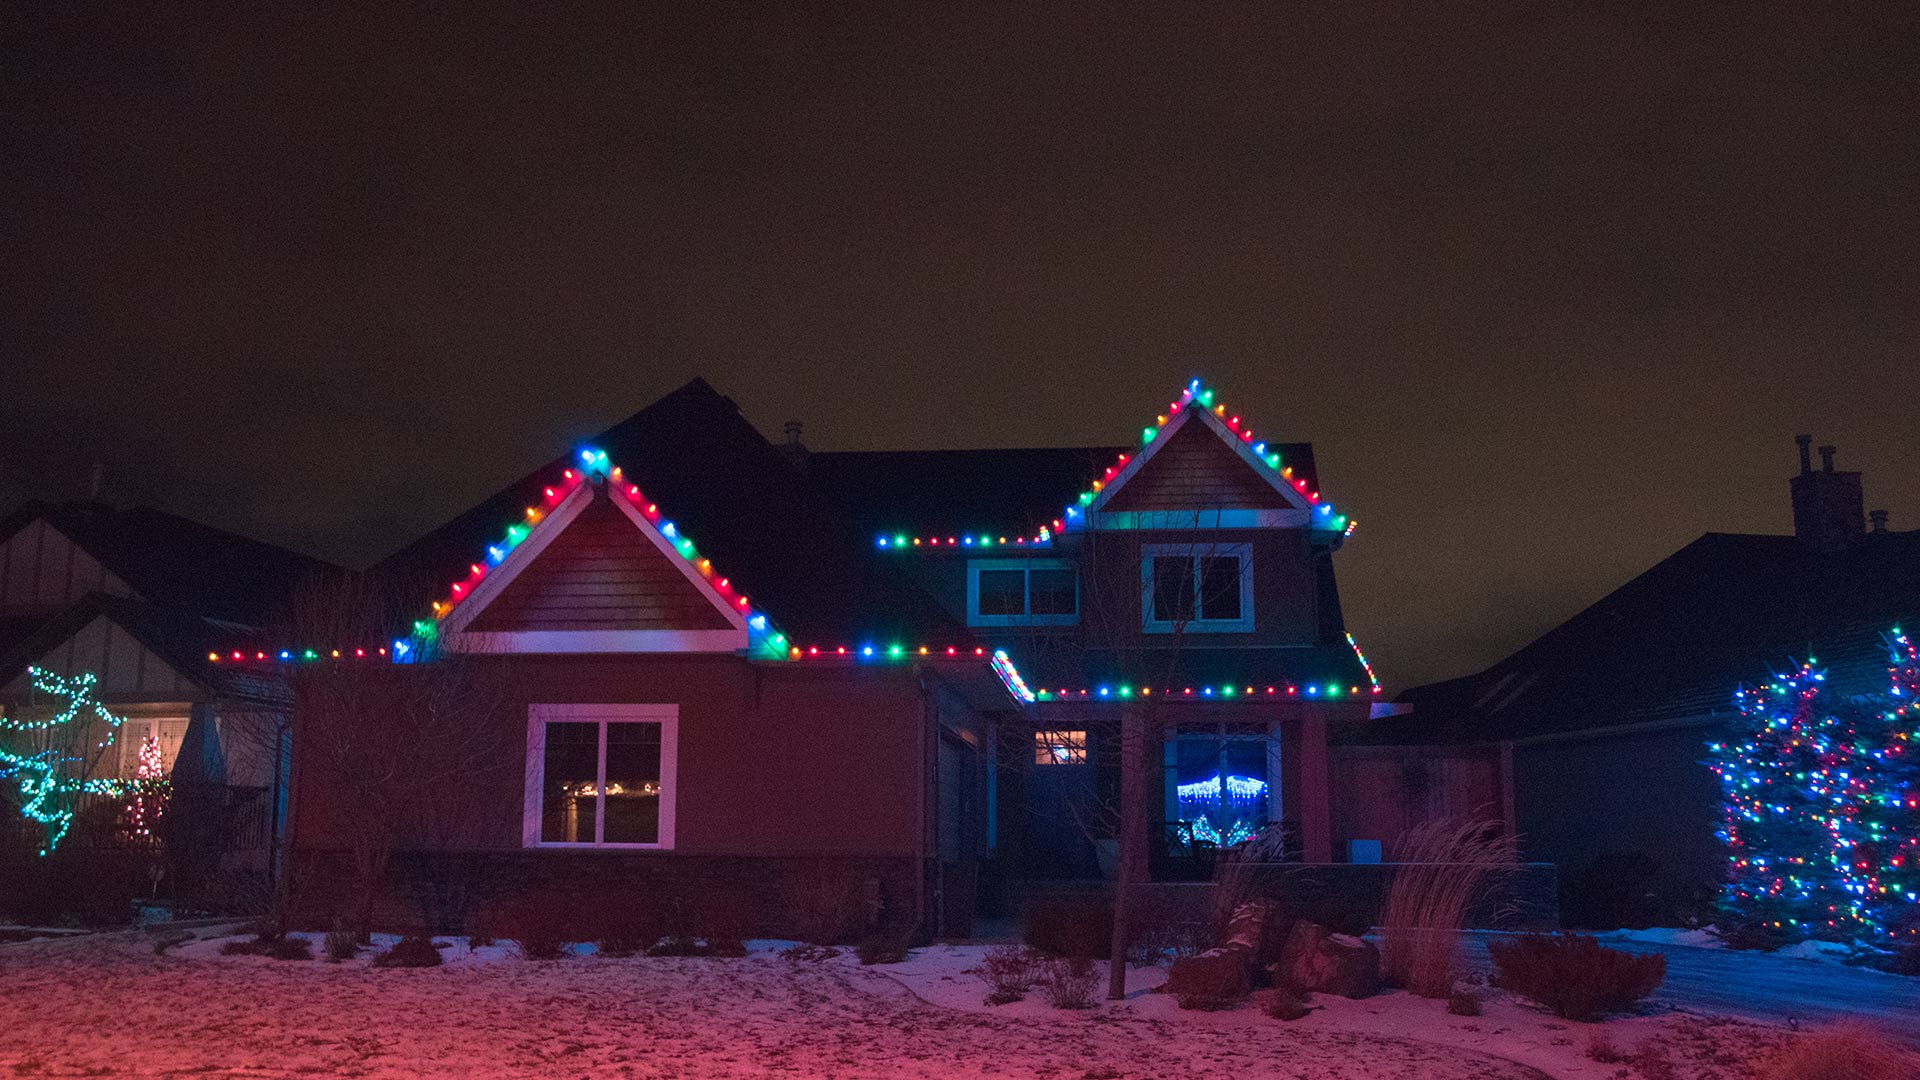 Should You Hire Professionals to Install Your Holiday Lights?